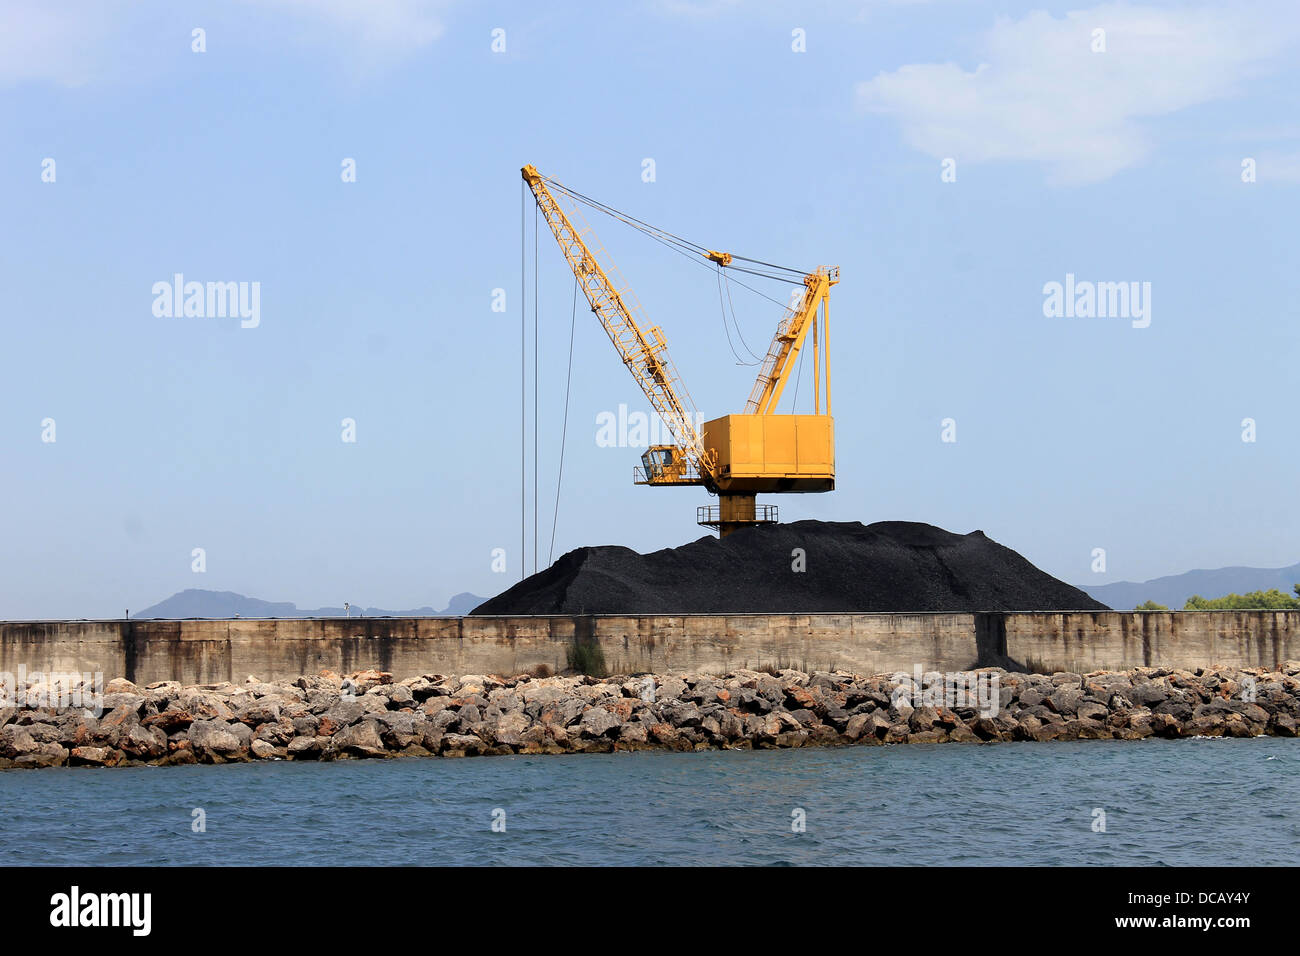 Scenic view of yellow industrial crane and pile of coal on docks, Alcudia harbor, Majorca, Spain. Stock Photo